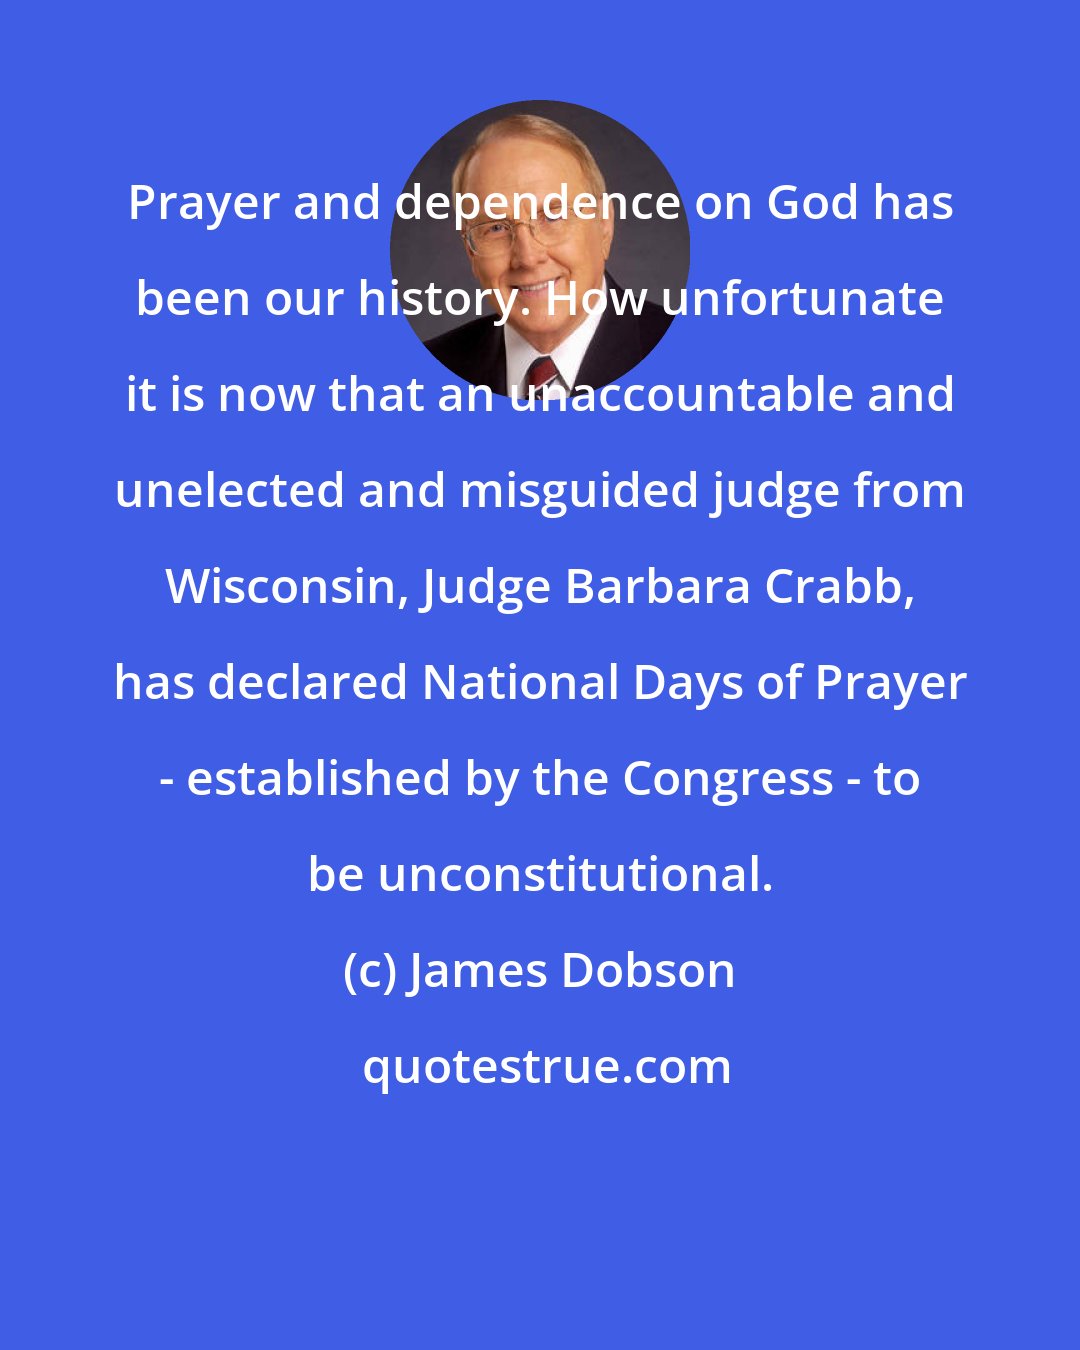 James Dobson: Prayer and dependence on God has been our history. How unfortunate it is now that an unaccountable and unelected and misguided judge from Wisconsin, Judge Barbara Crabb, has declared National Days of Prayer - established by the Congress - to be unconstitutional.